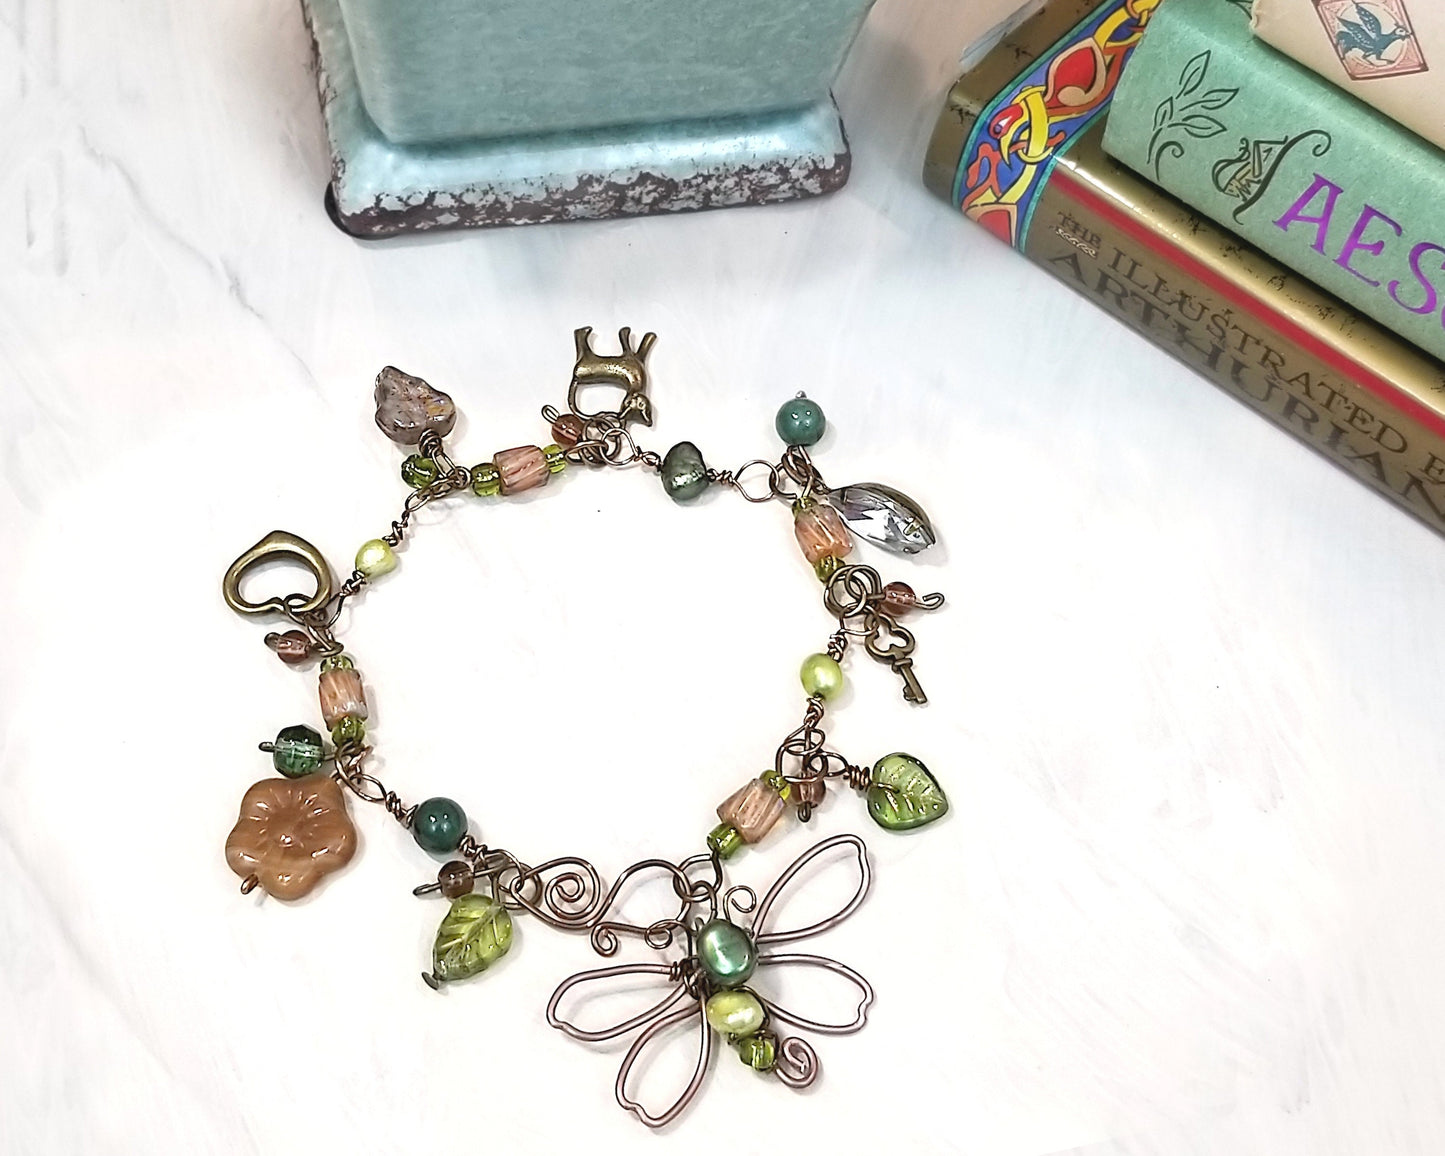 Forest Dragonfly Bracelet in Green and Brown with Glass Beads, Pearls and Metal Charms, Adjustable Length